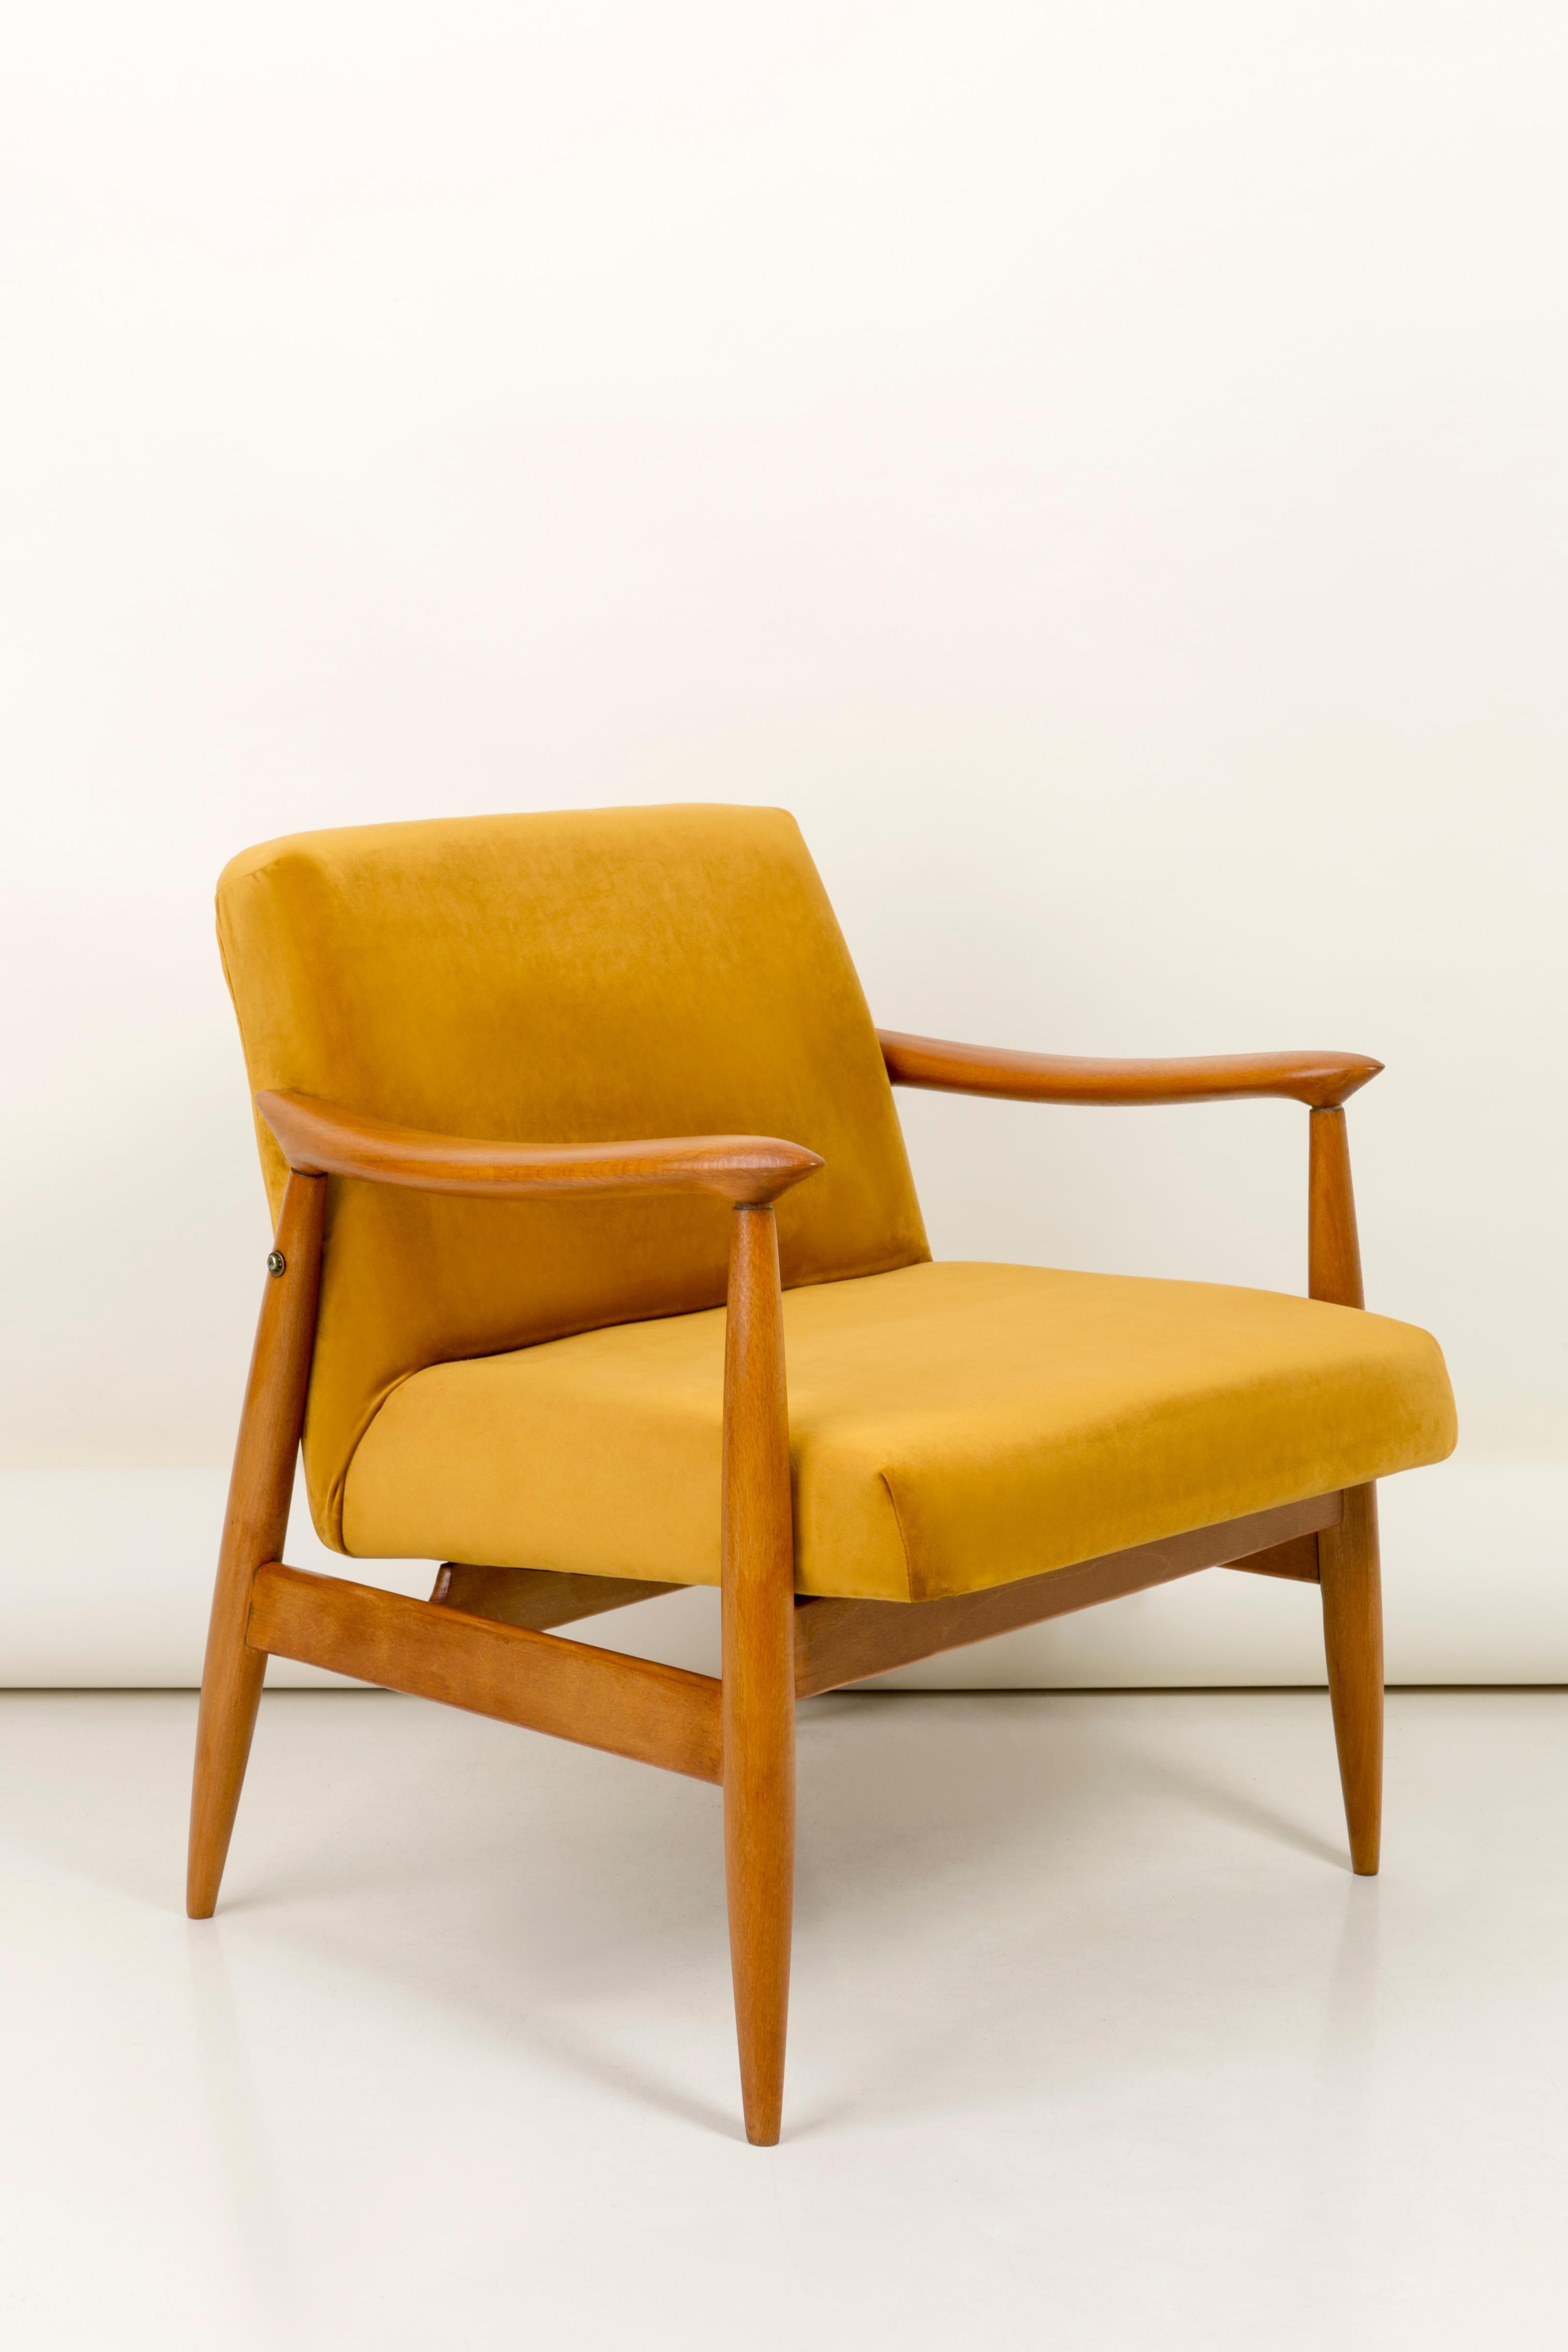 The GFM armchair is an icon of the polish design of the PRL period.

The famous armchair was designed in 1962 by the Polish interior designer and furniture designer 
Juliusz Kedziorek. Produced in the Lower Silesian Furniture Factory in